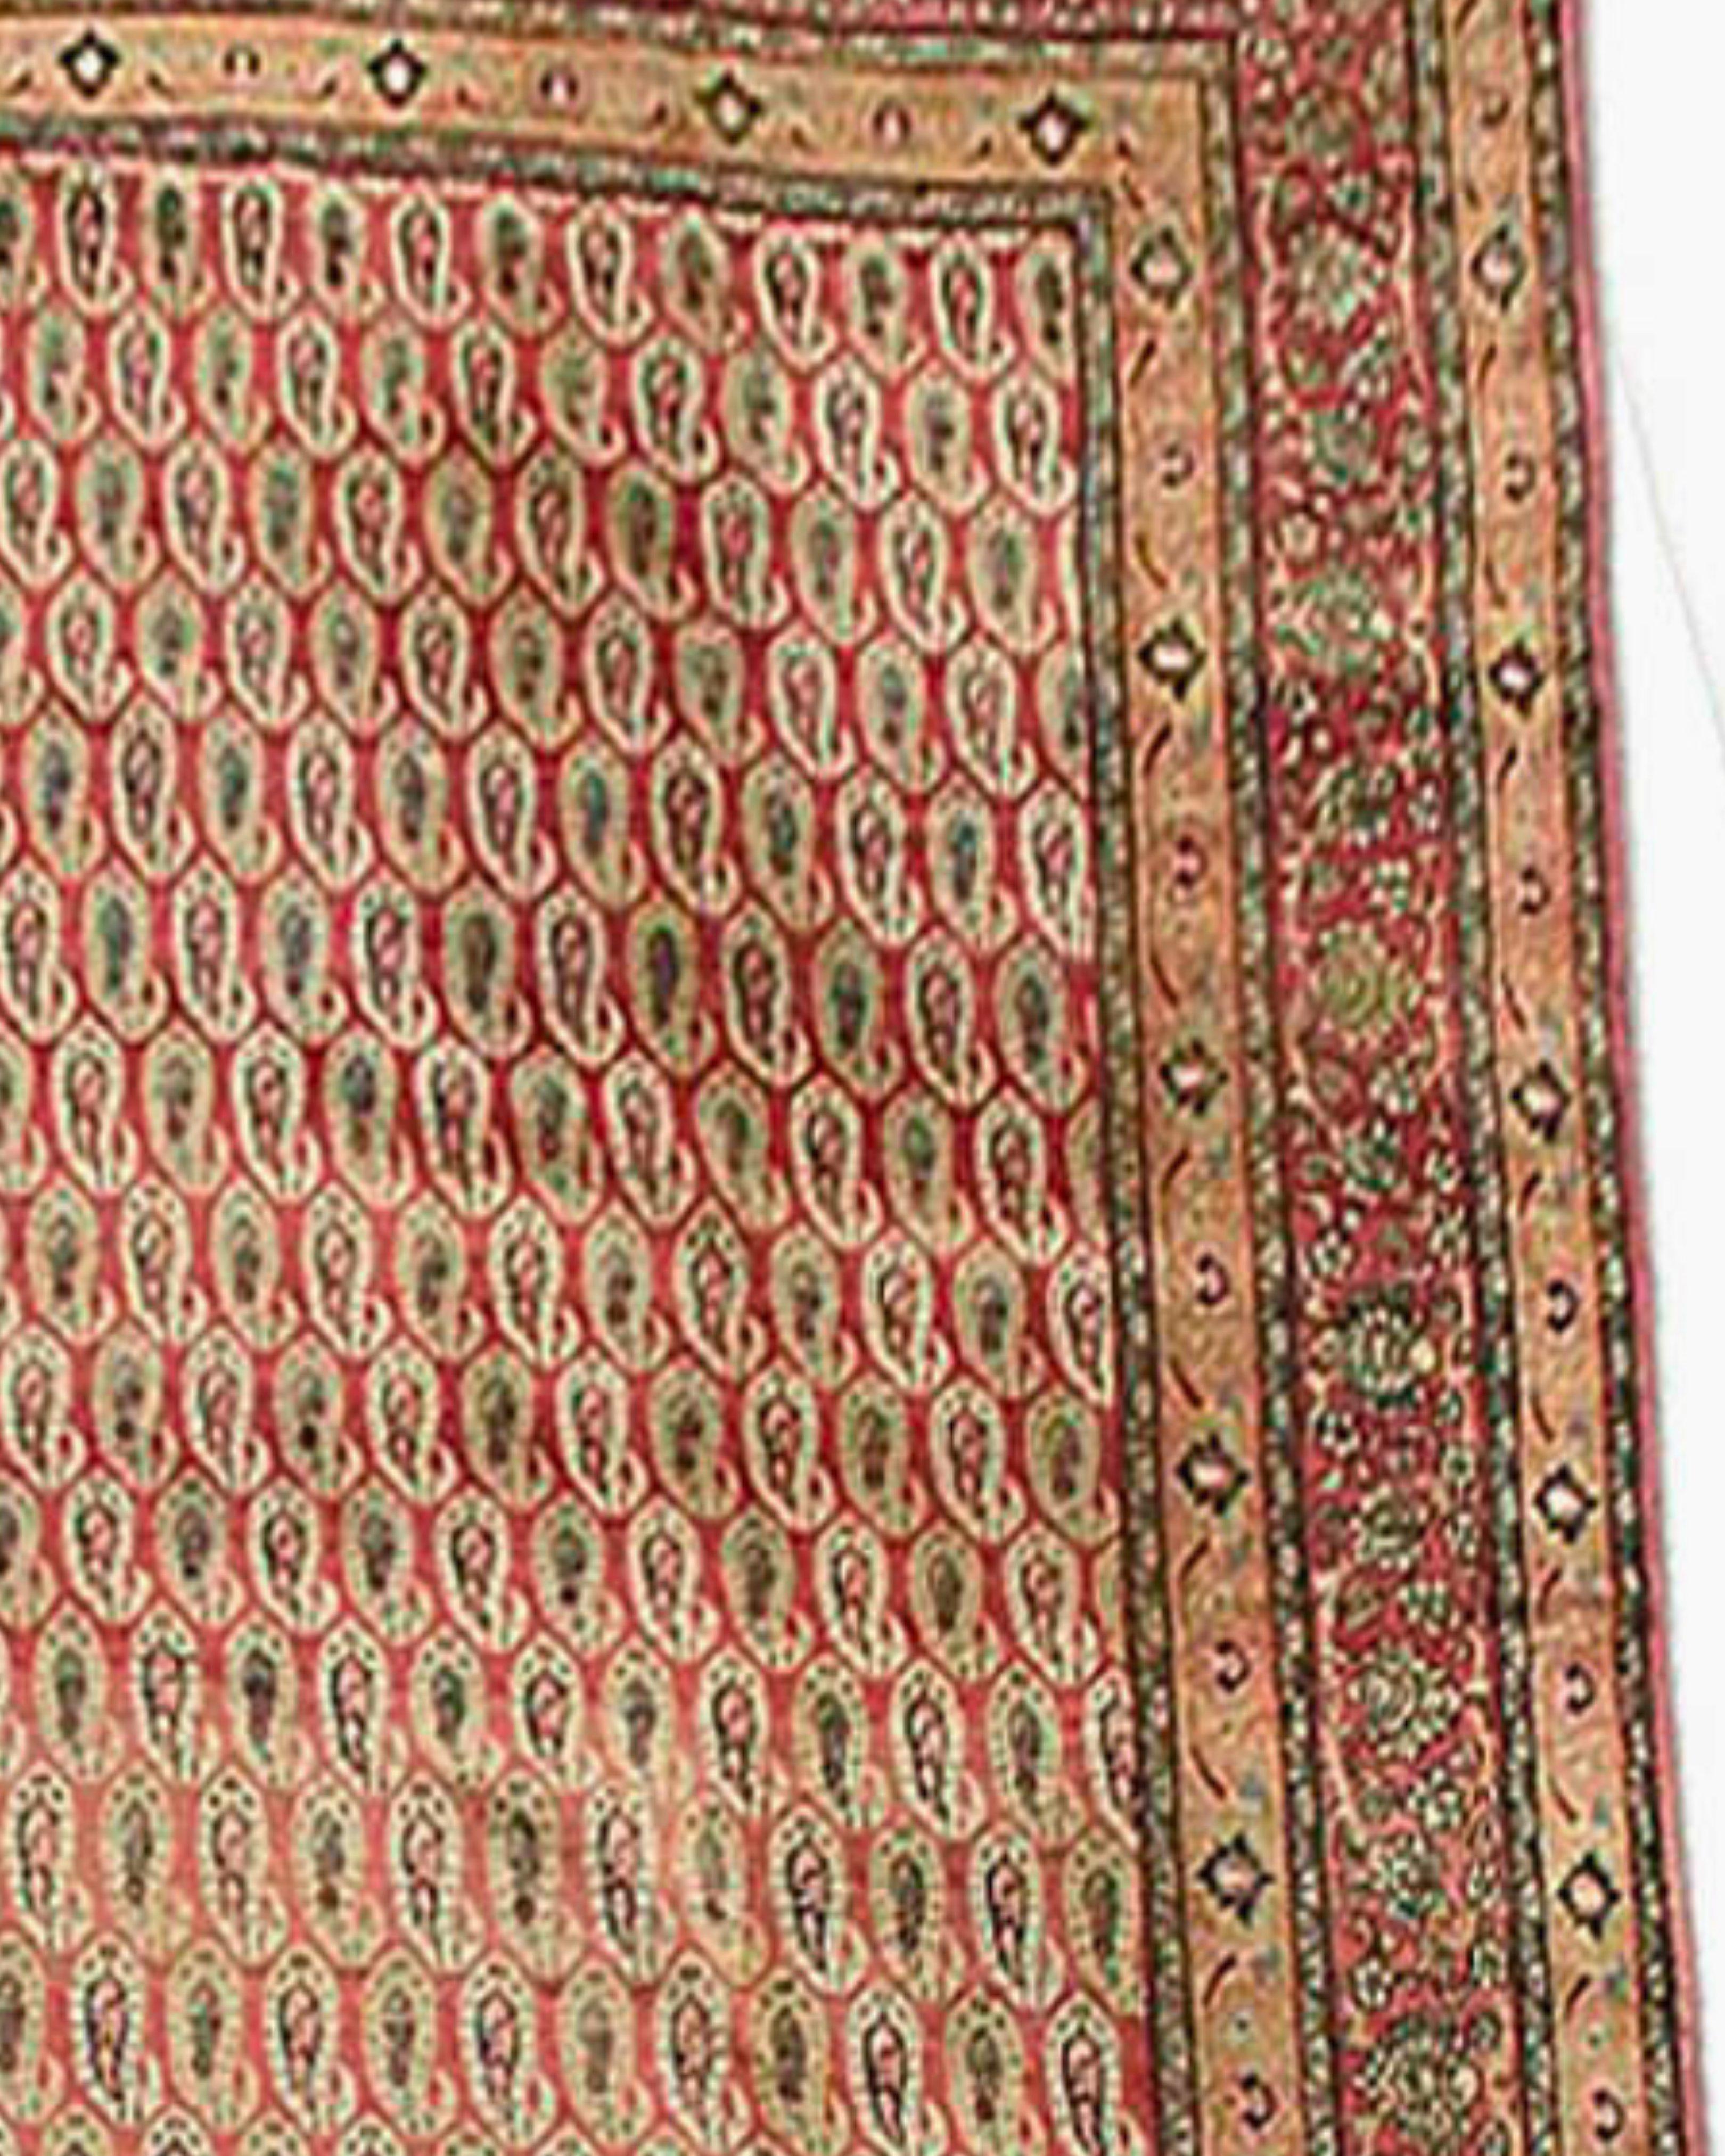 Antique Persian Khorassan Rug, 19th Century

Khorosan, a major Persian cultural center and home to renowned classical poets such as Omar Khayam and Ferdosi is less known as a major weaving center. While there is evidence that there may have been